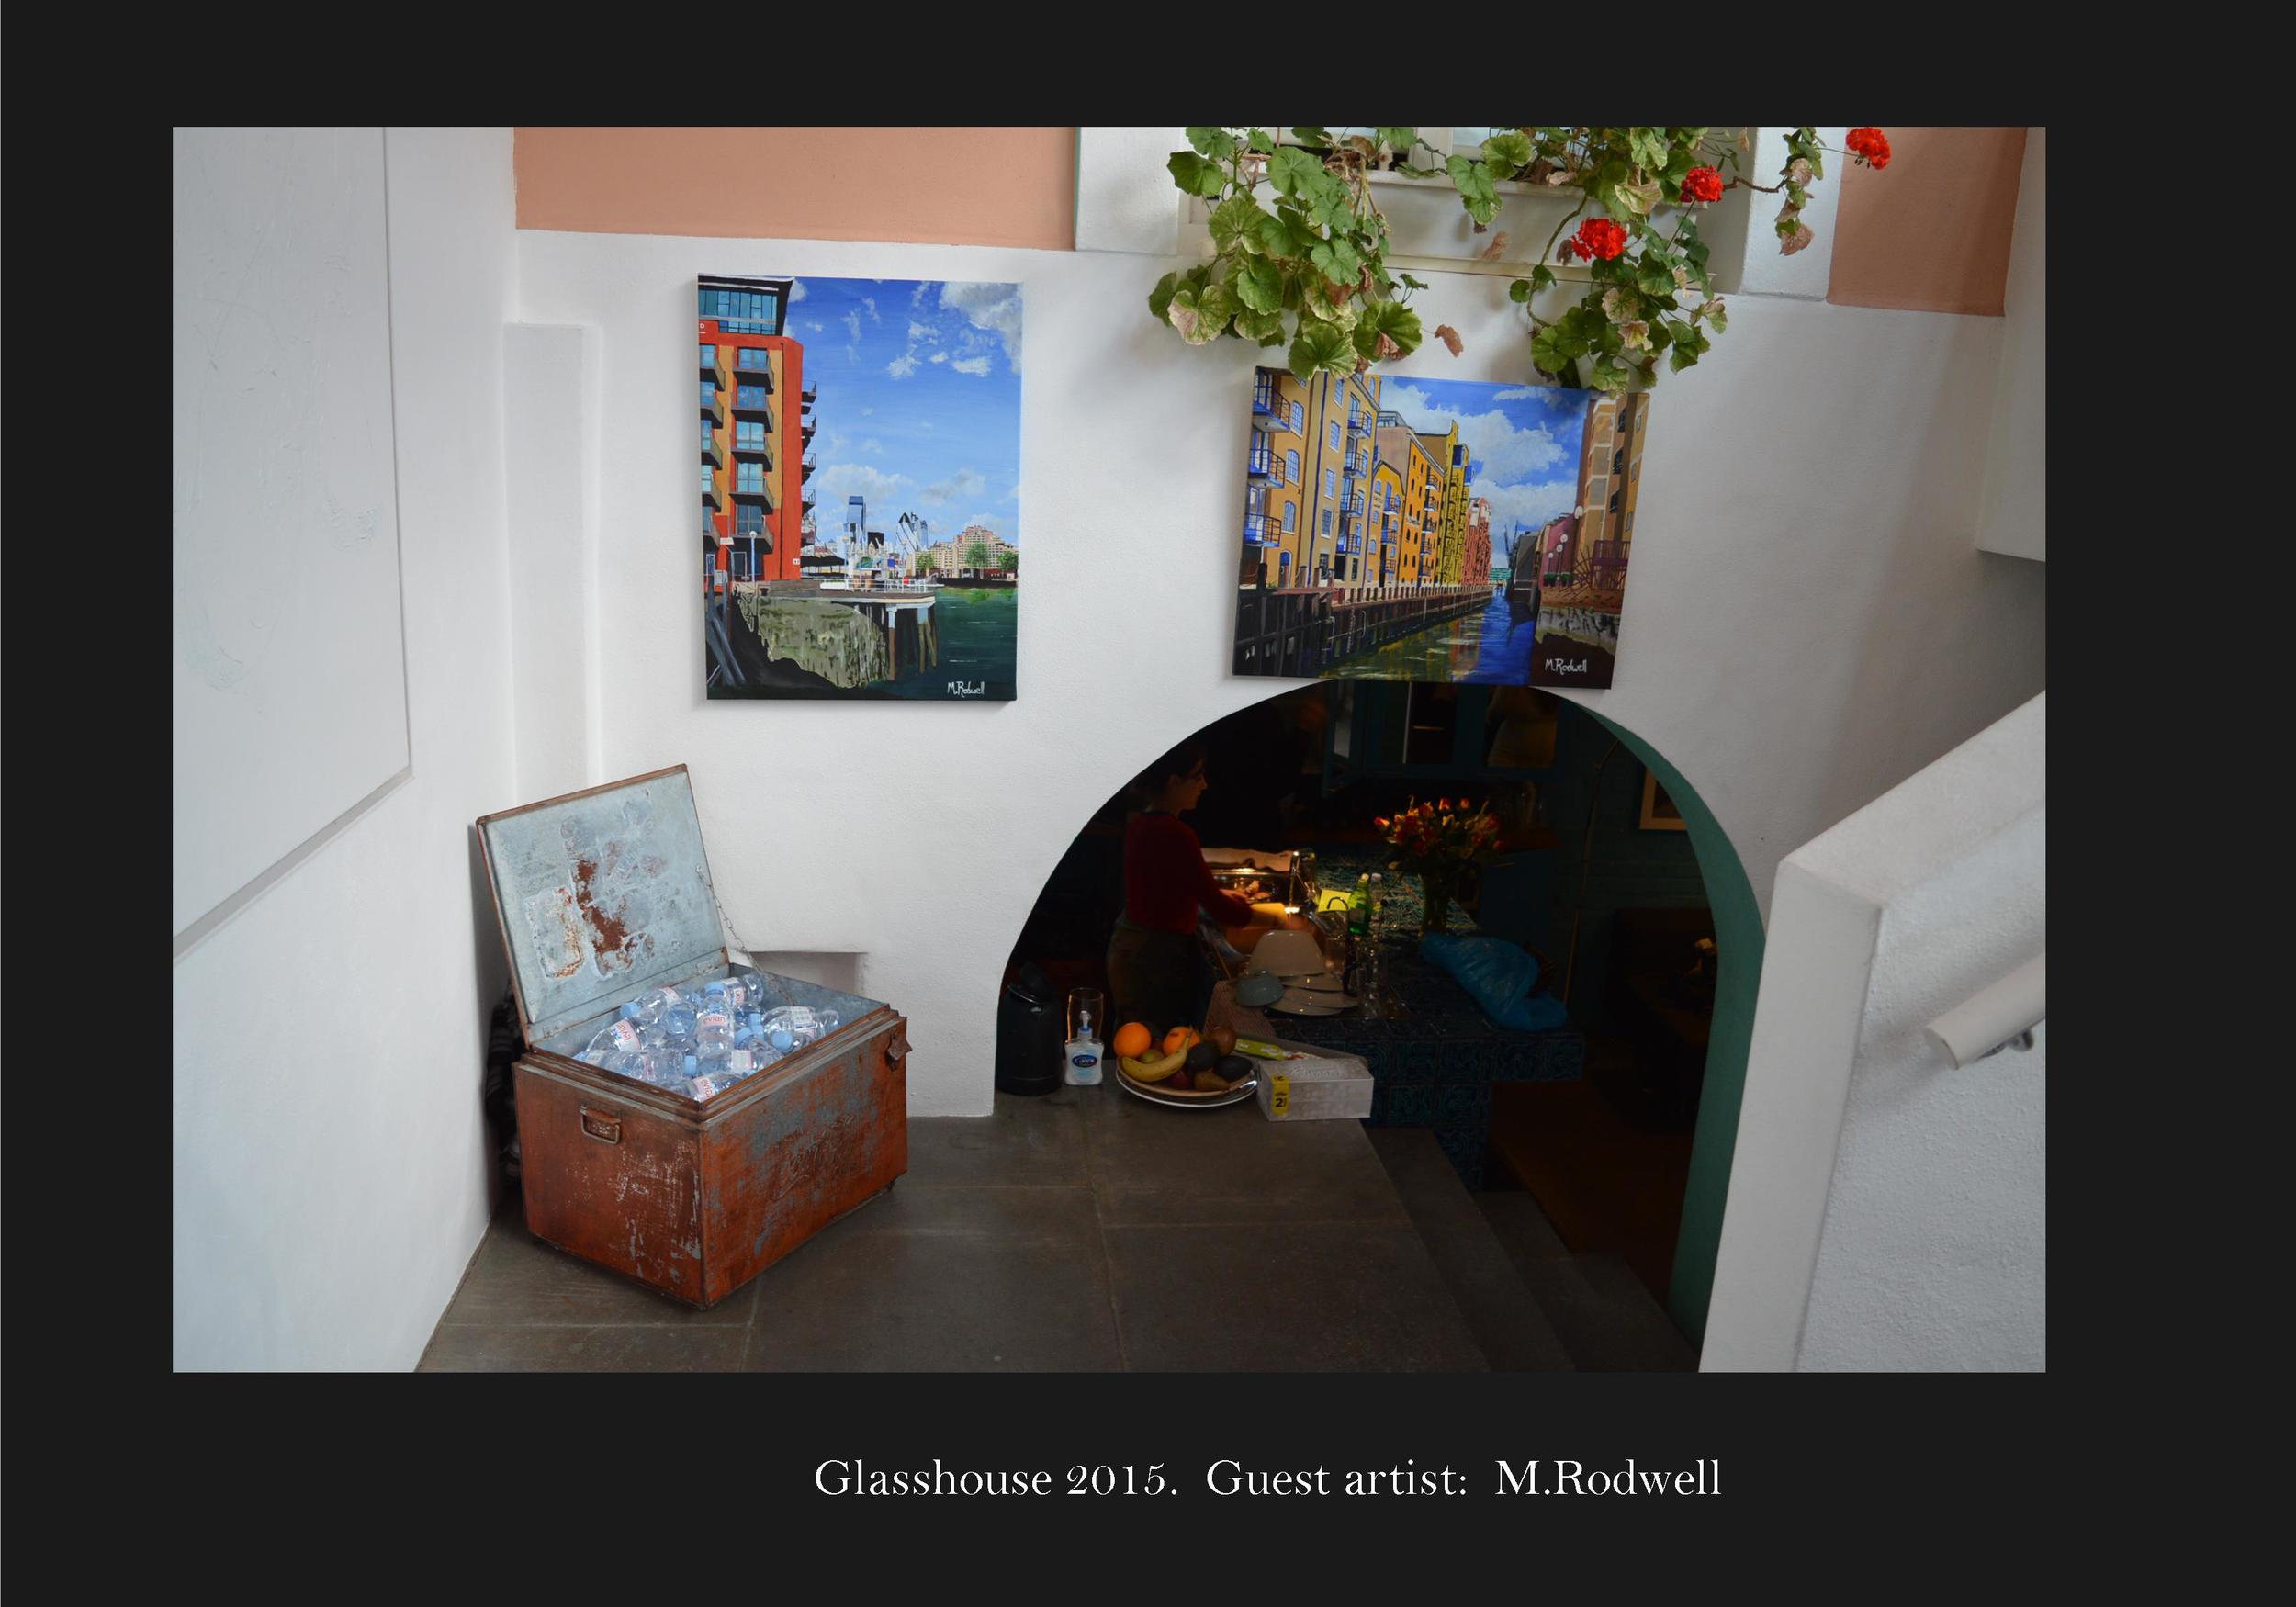 Glasshouse exhbition featuring M.Rodwell 